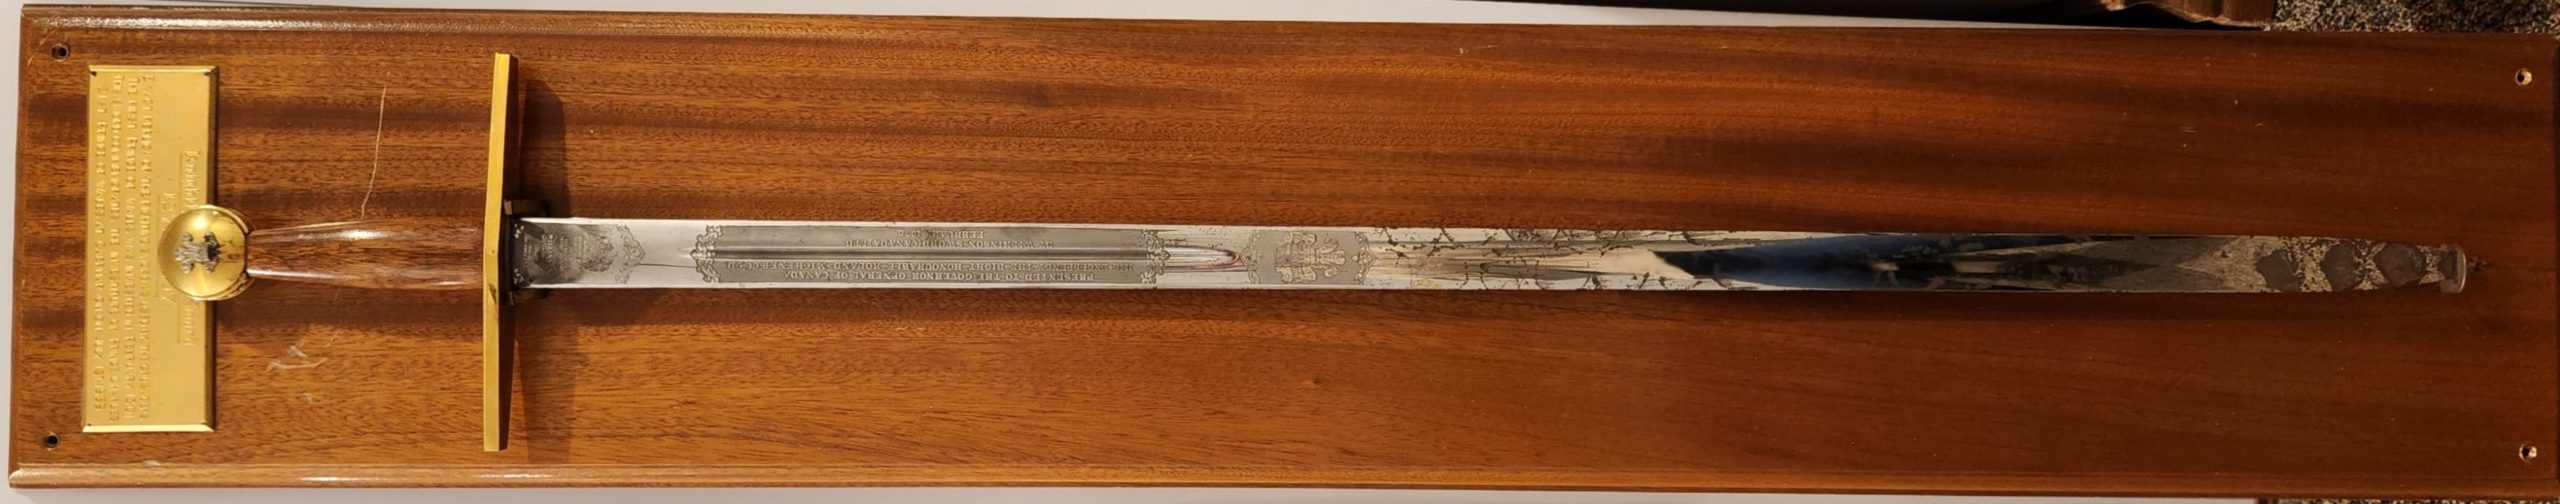 Commemorative sword gifted to Roland Michener 